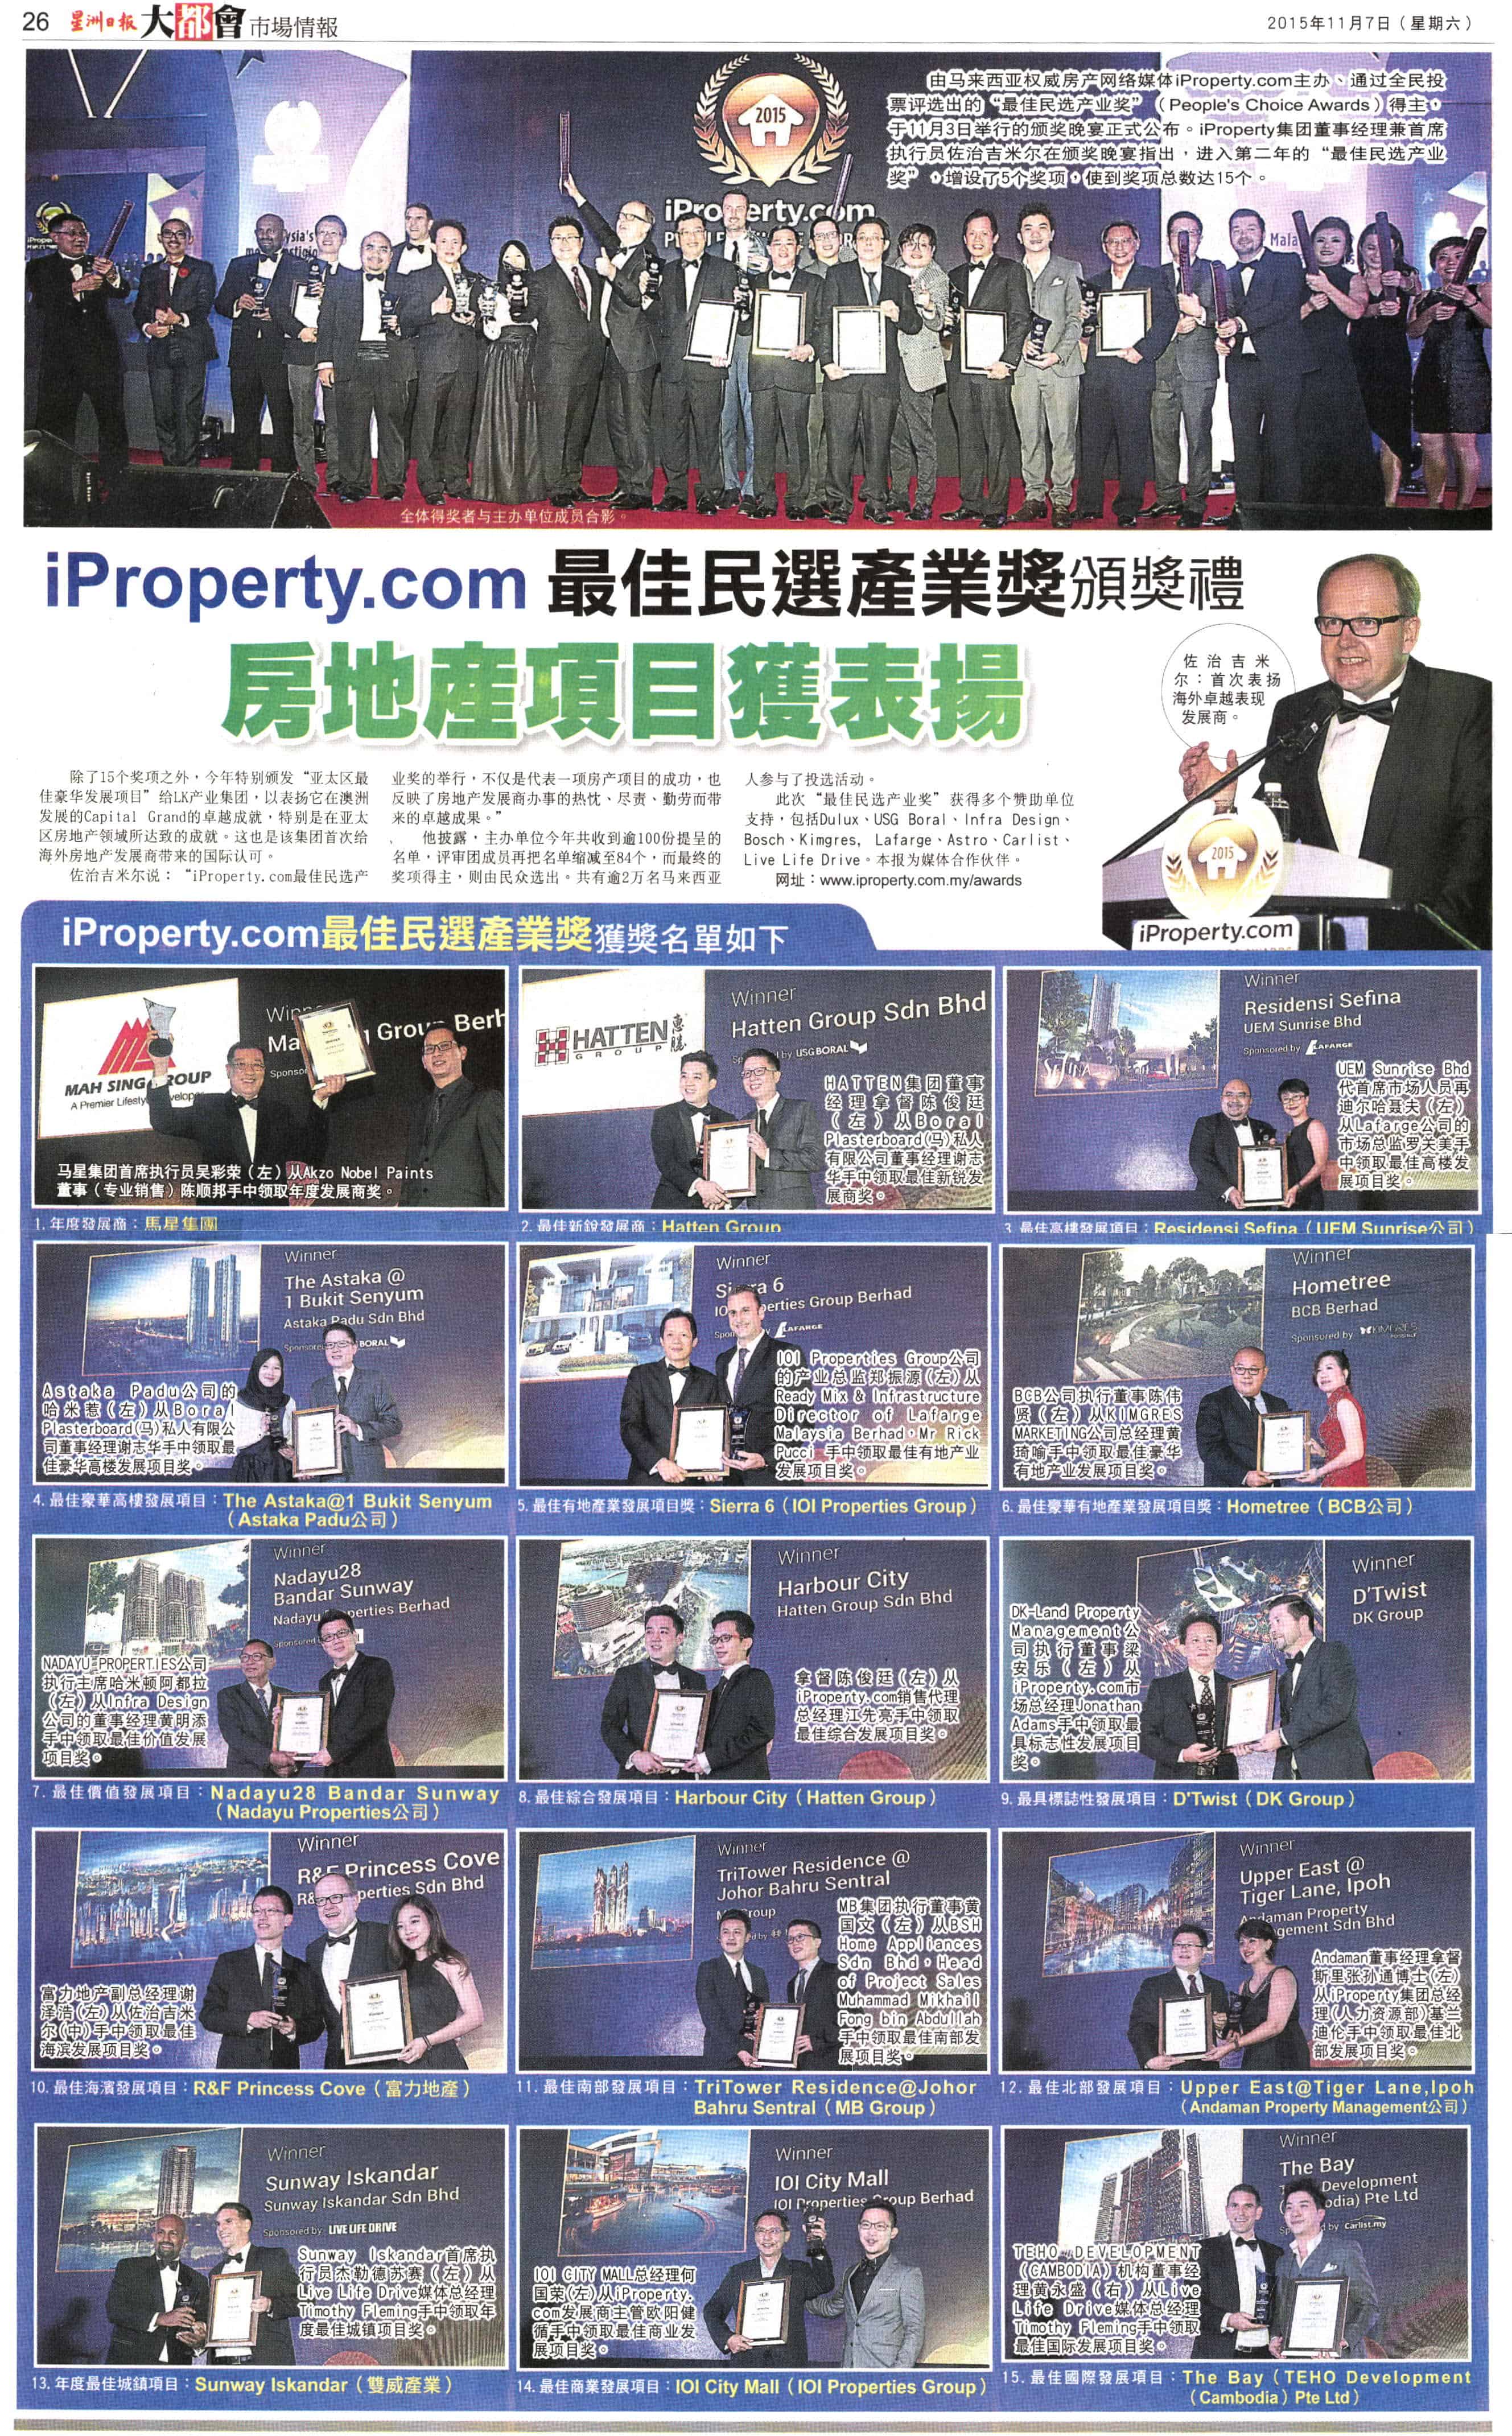 sponsor at the iProperty People’s Choice Awards